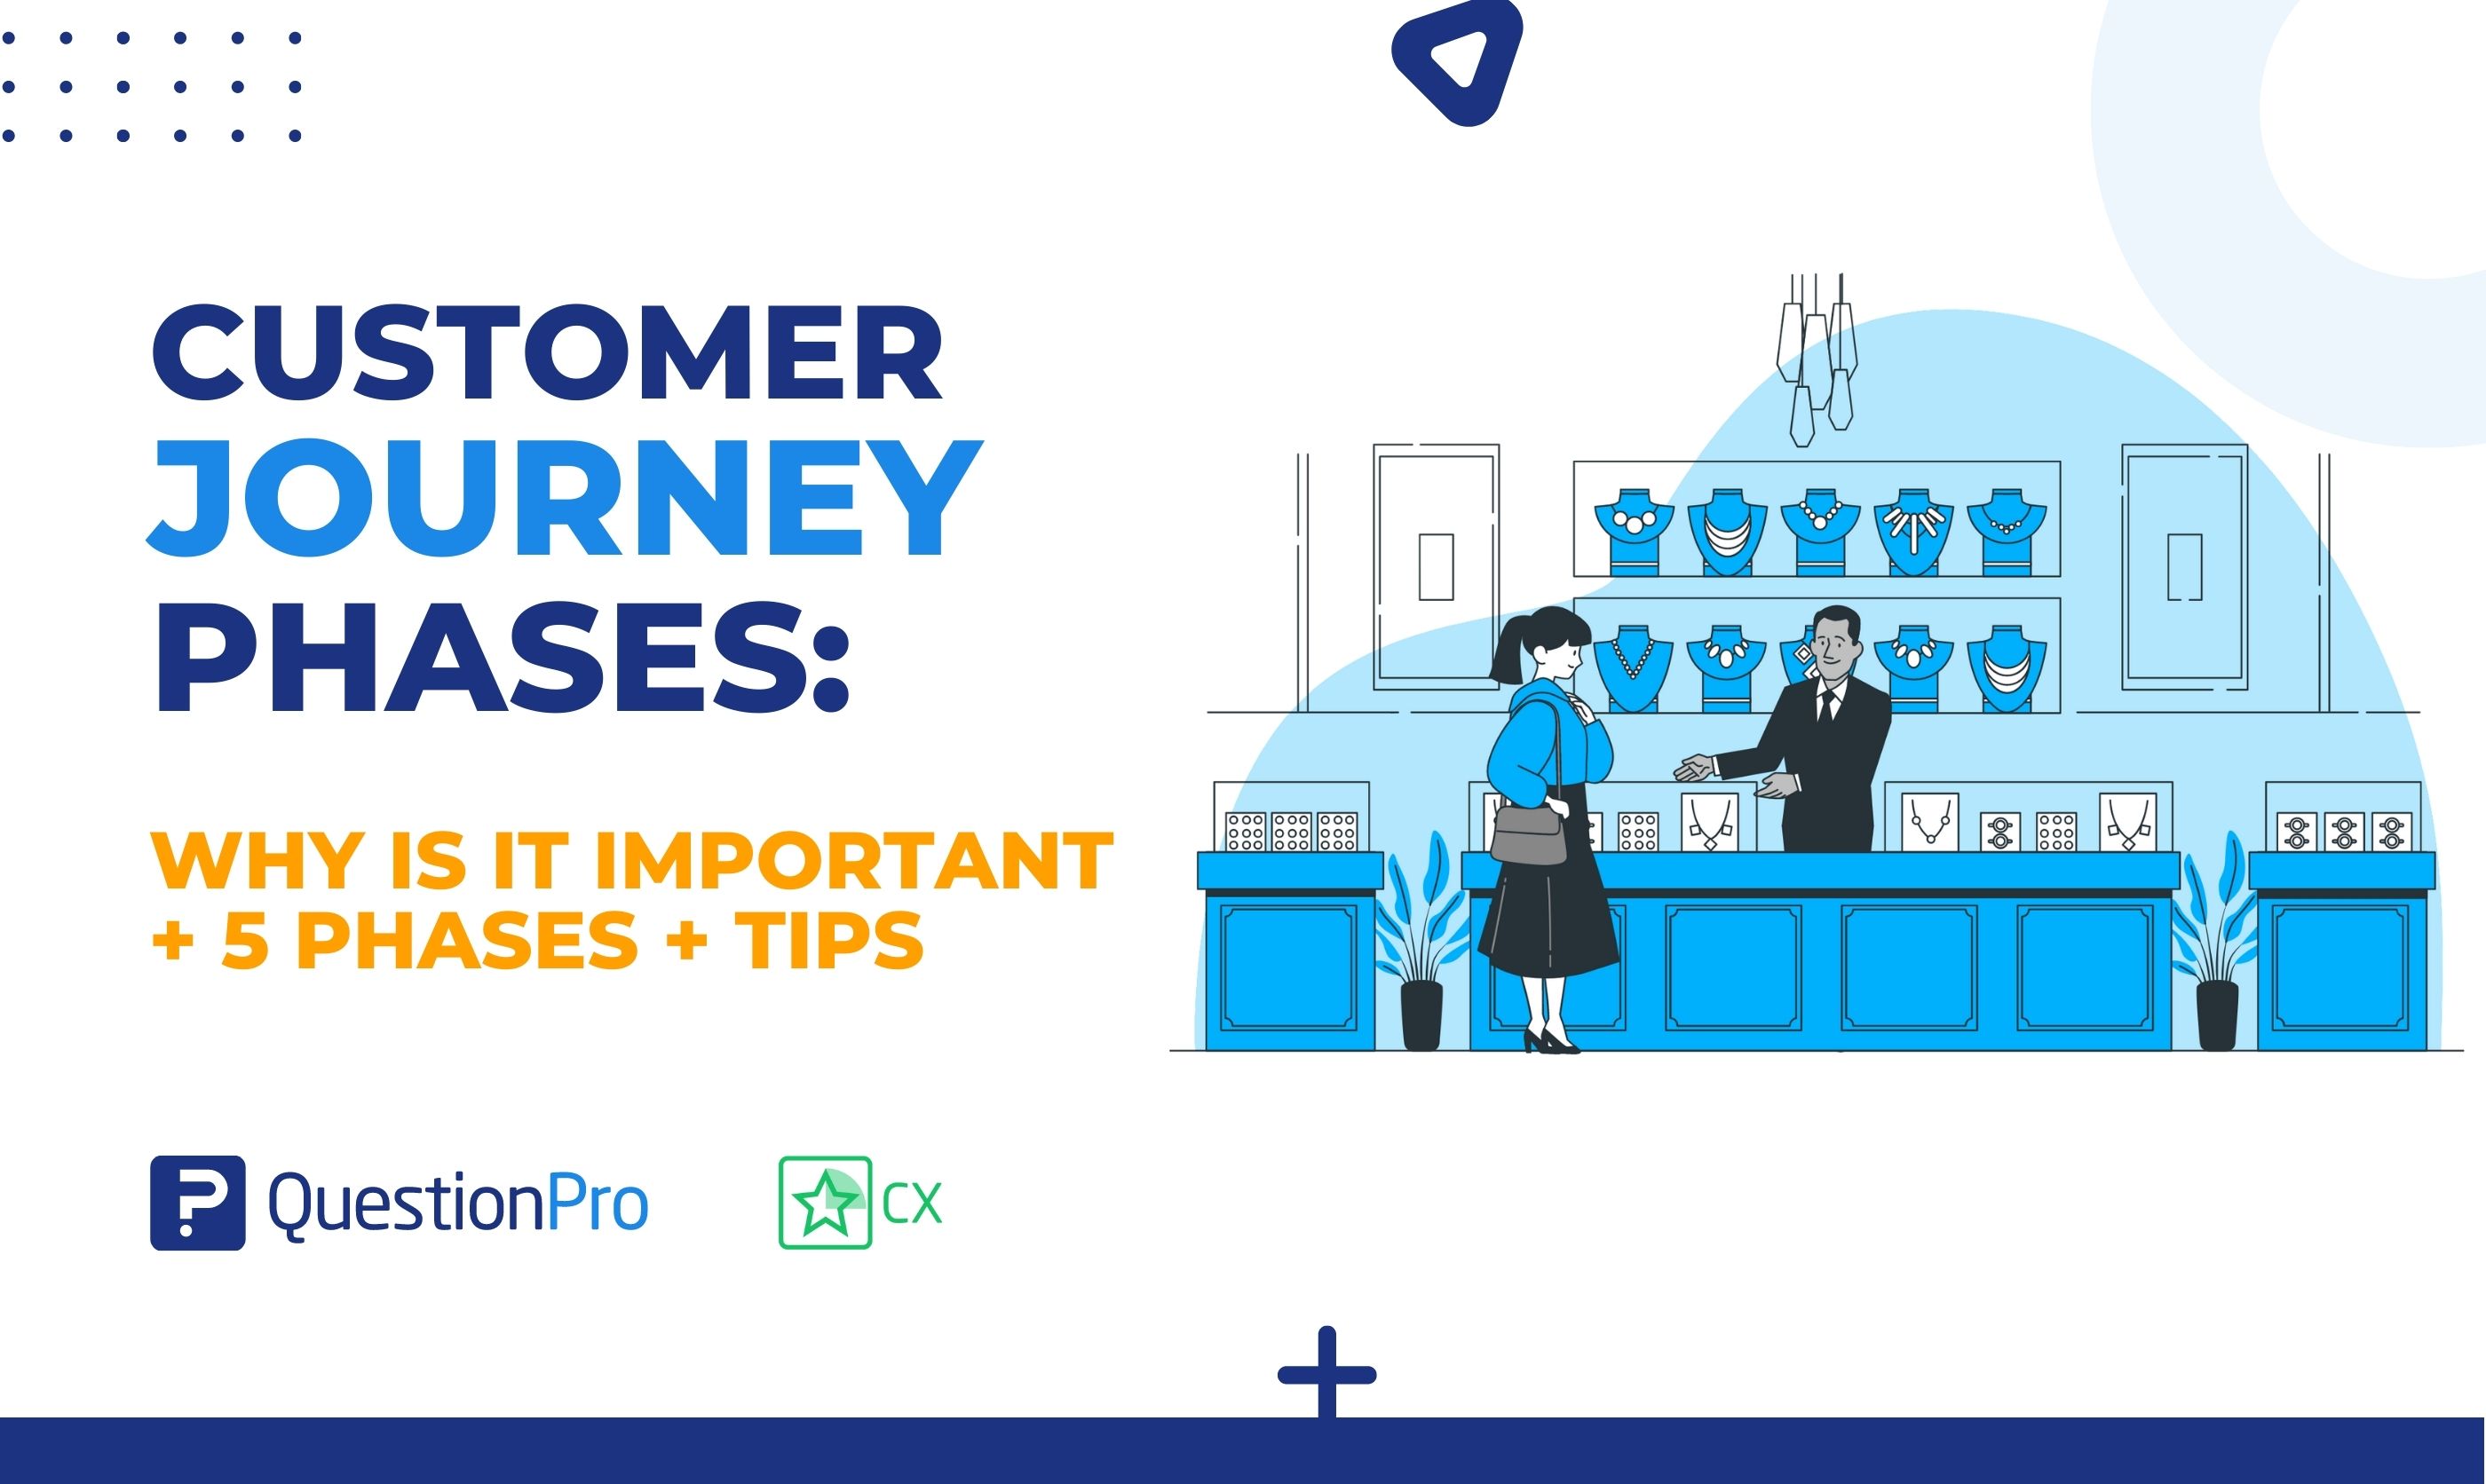 Customer Journey Phases help analyze and improve customer experiences. This can help companies find ways to boost customer satisfaction.